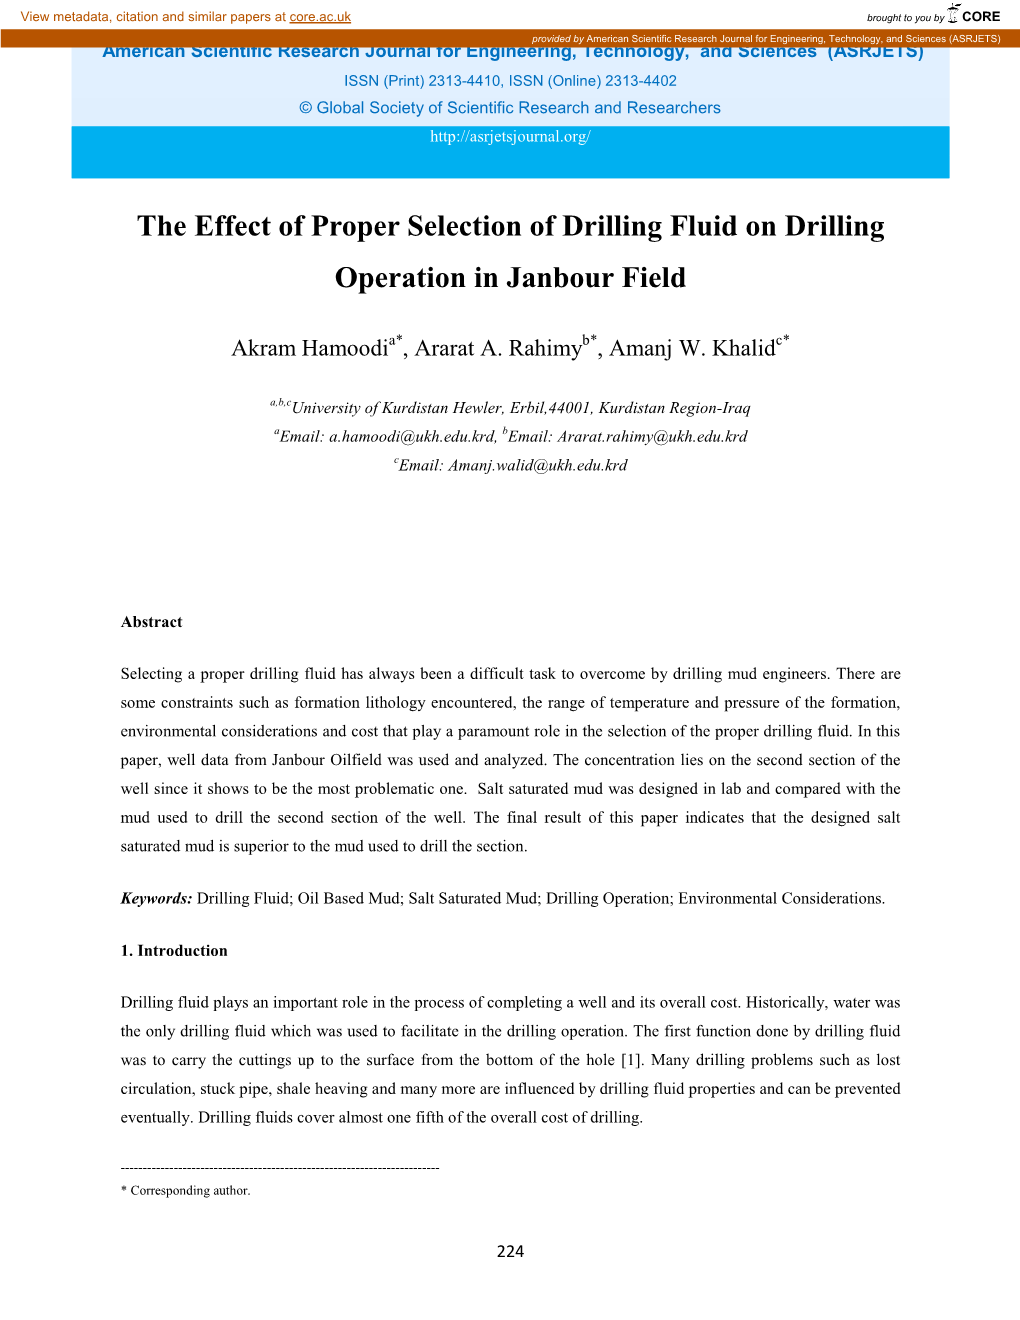 The Effect of Proper Selection of Drilling Fluid on Drilling Operation in Janbour Field